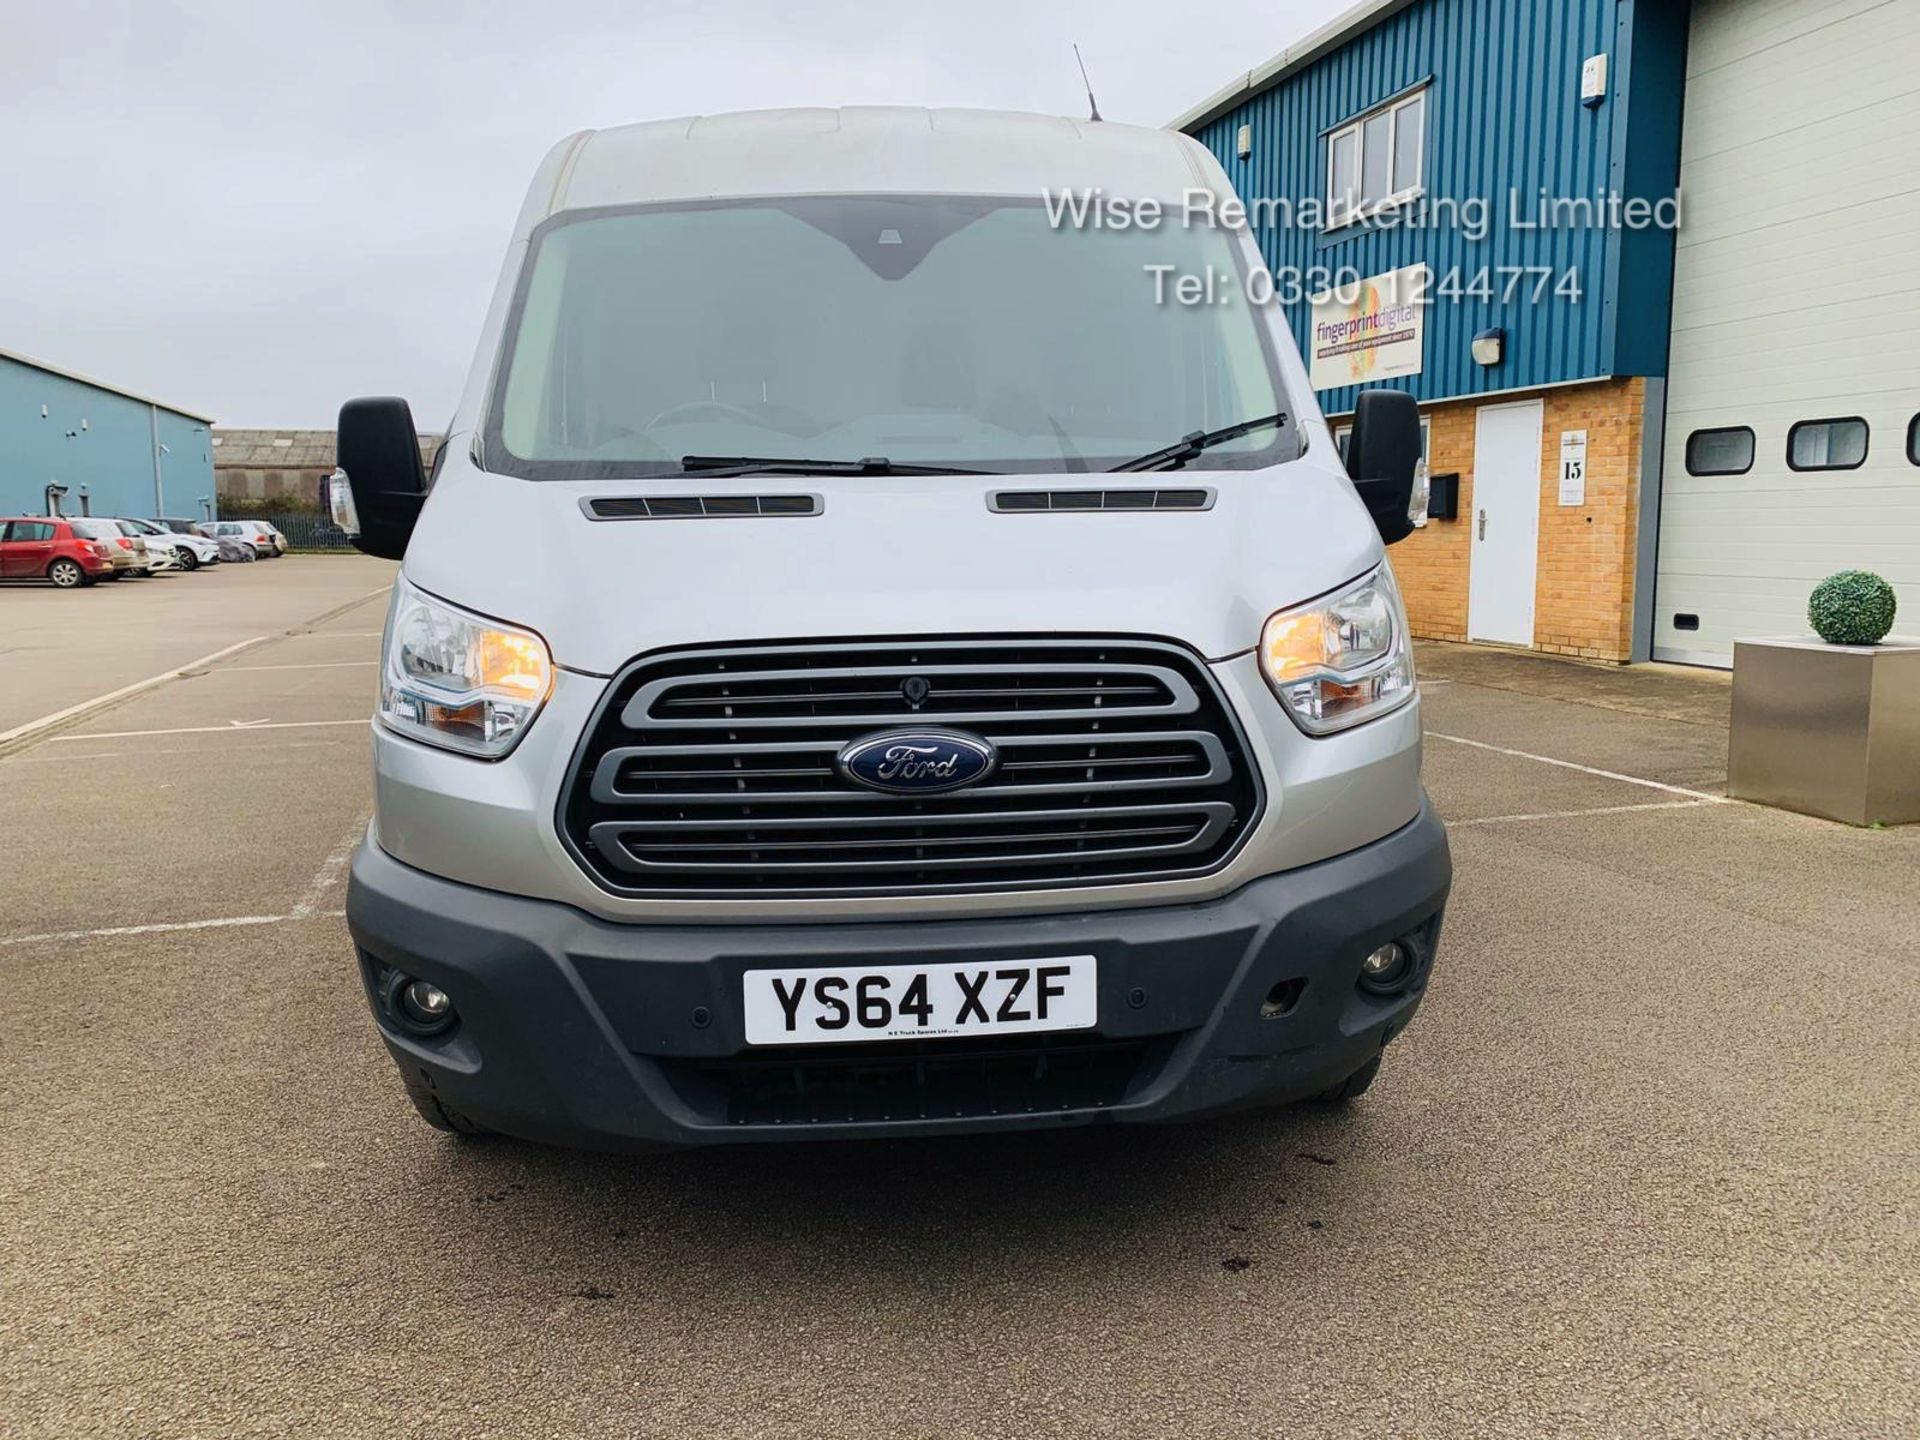 Ford Transit 350 2.2 TDCI Trend Van - 2015 Reg - Silver - 6 Speed - Ply Lined - Image 6 of 20